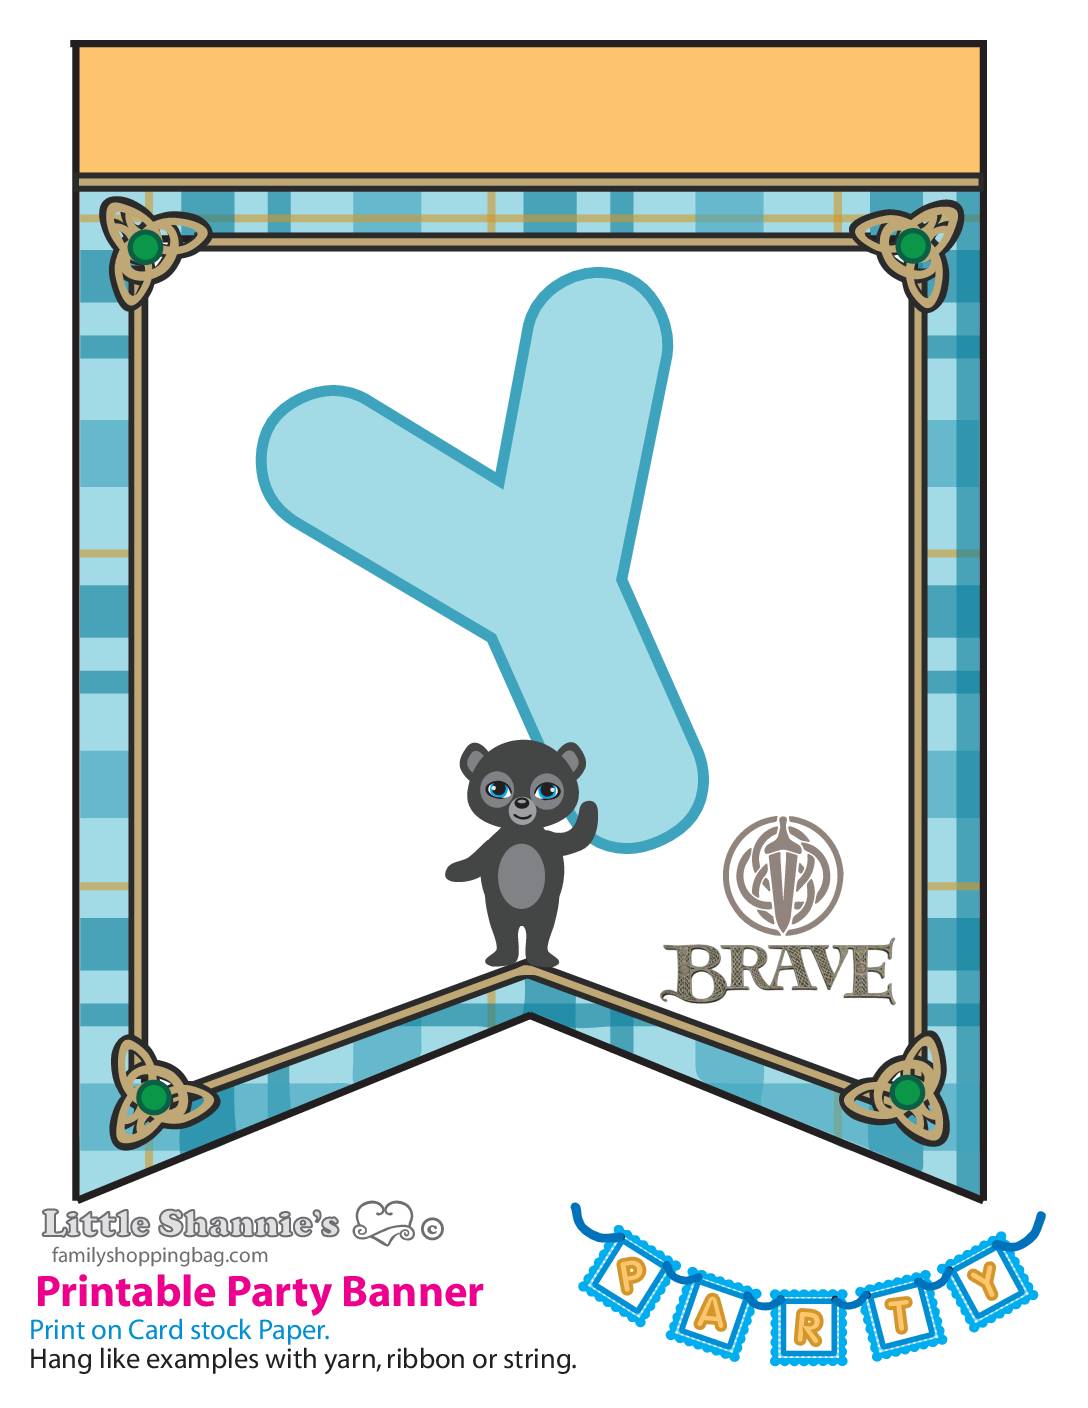 Party Banner y Brave Party Banners